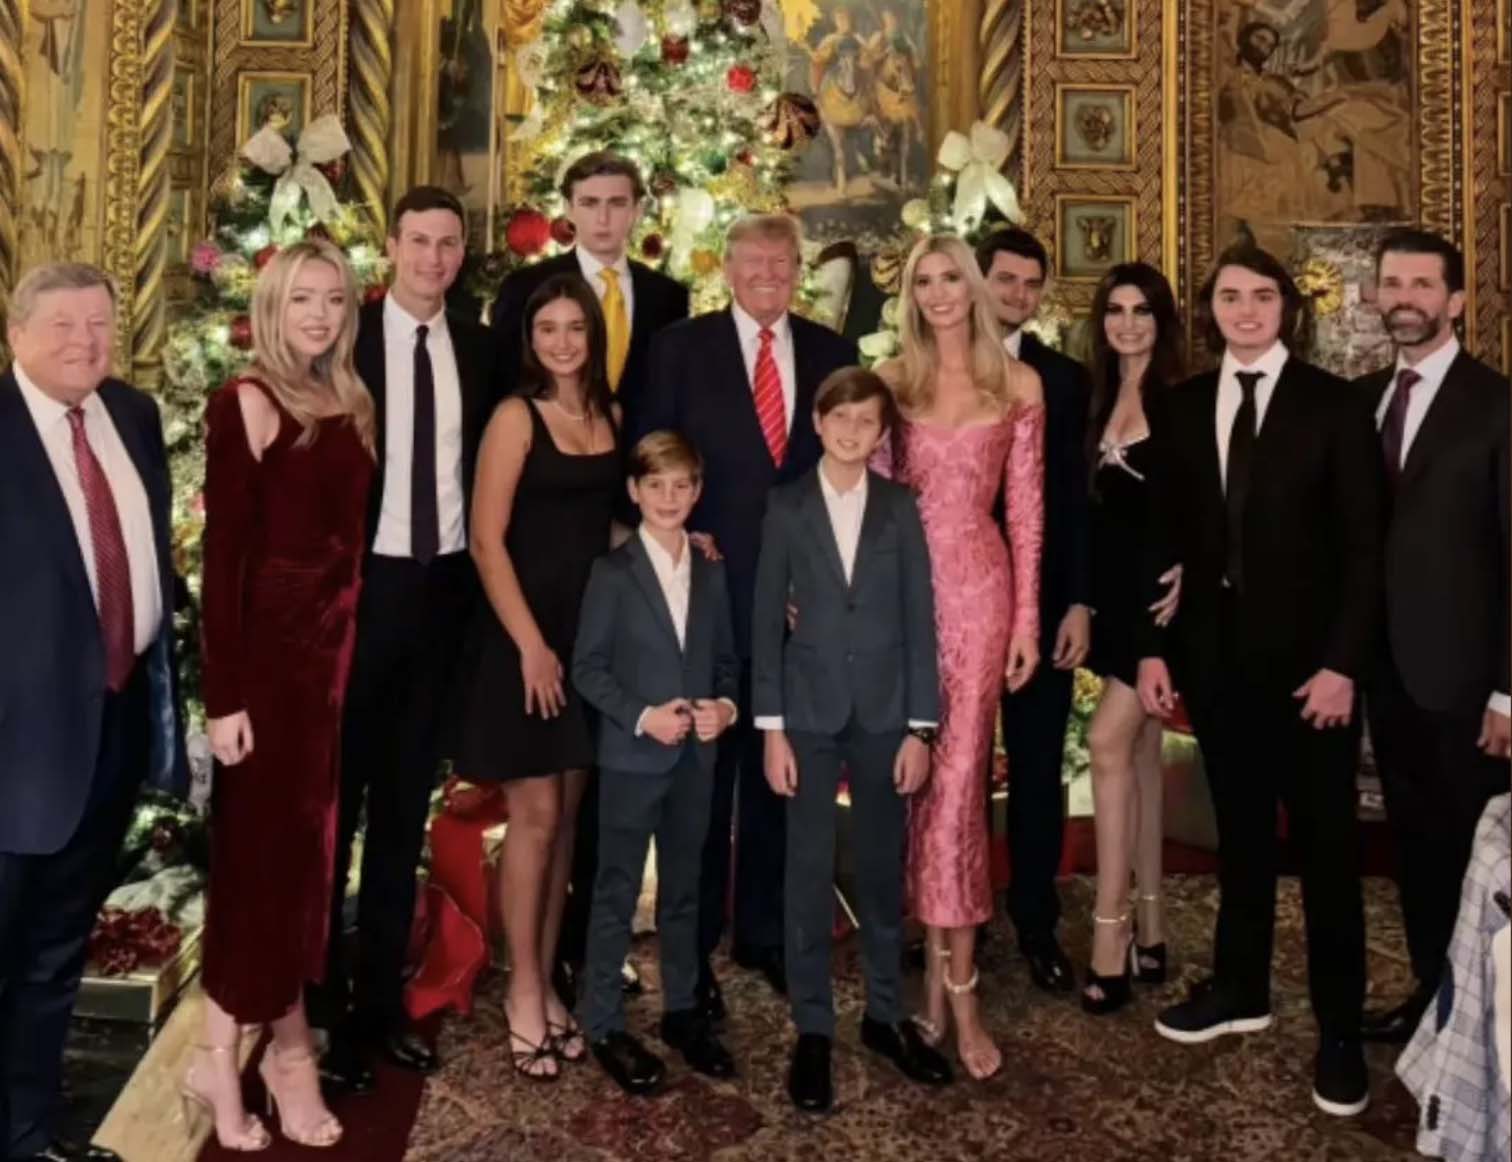 Barron Trump towers over family during Trump Christmas dinner (Image: Instagram)